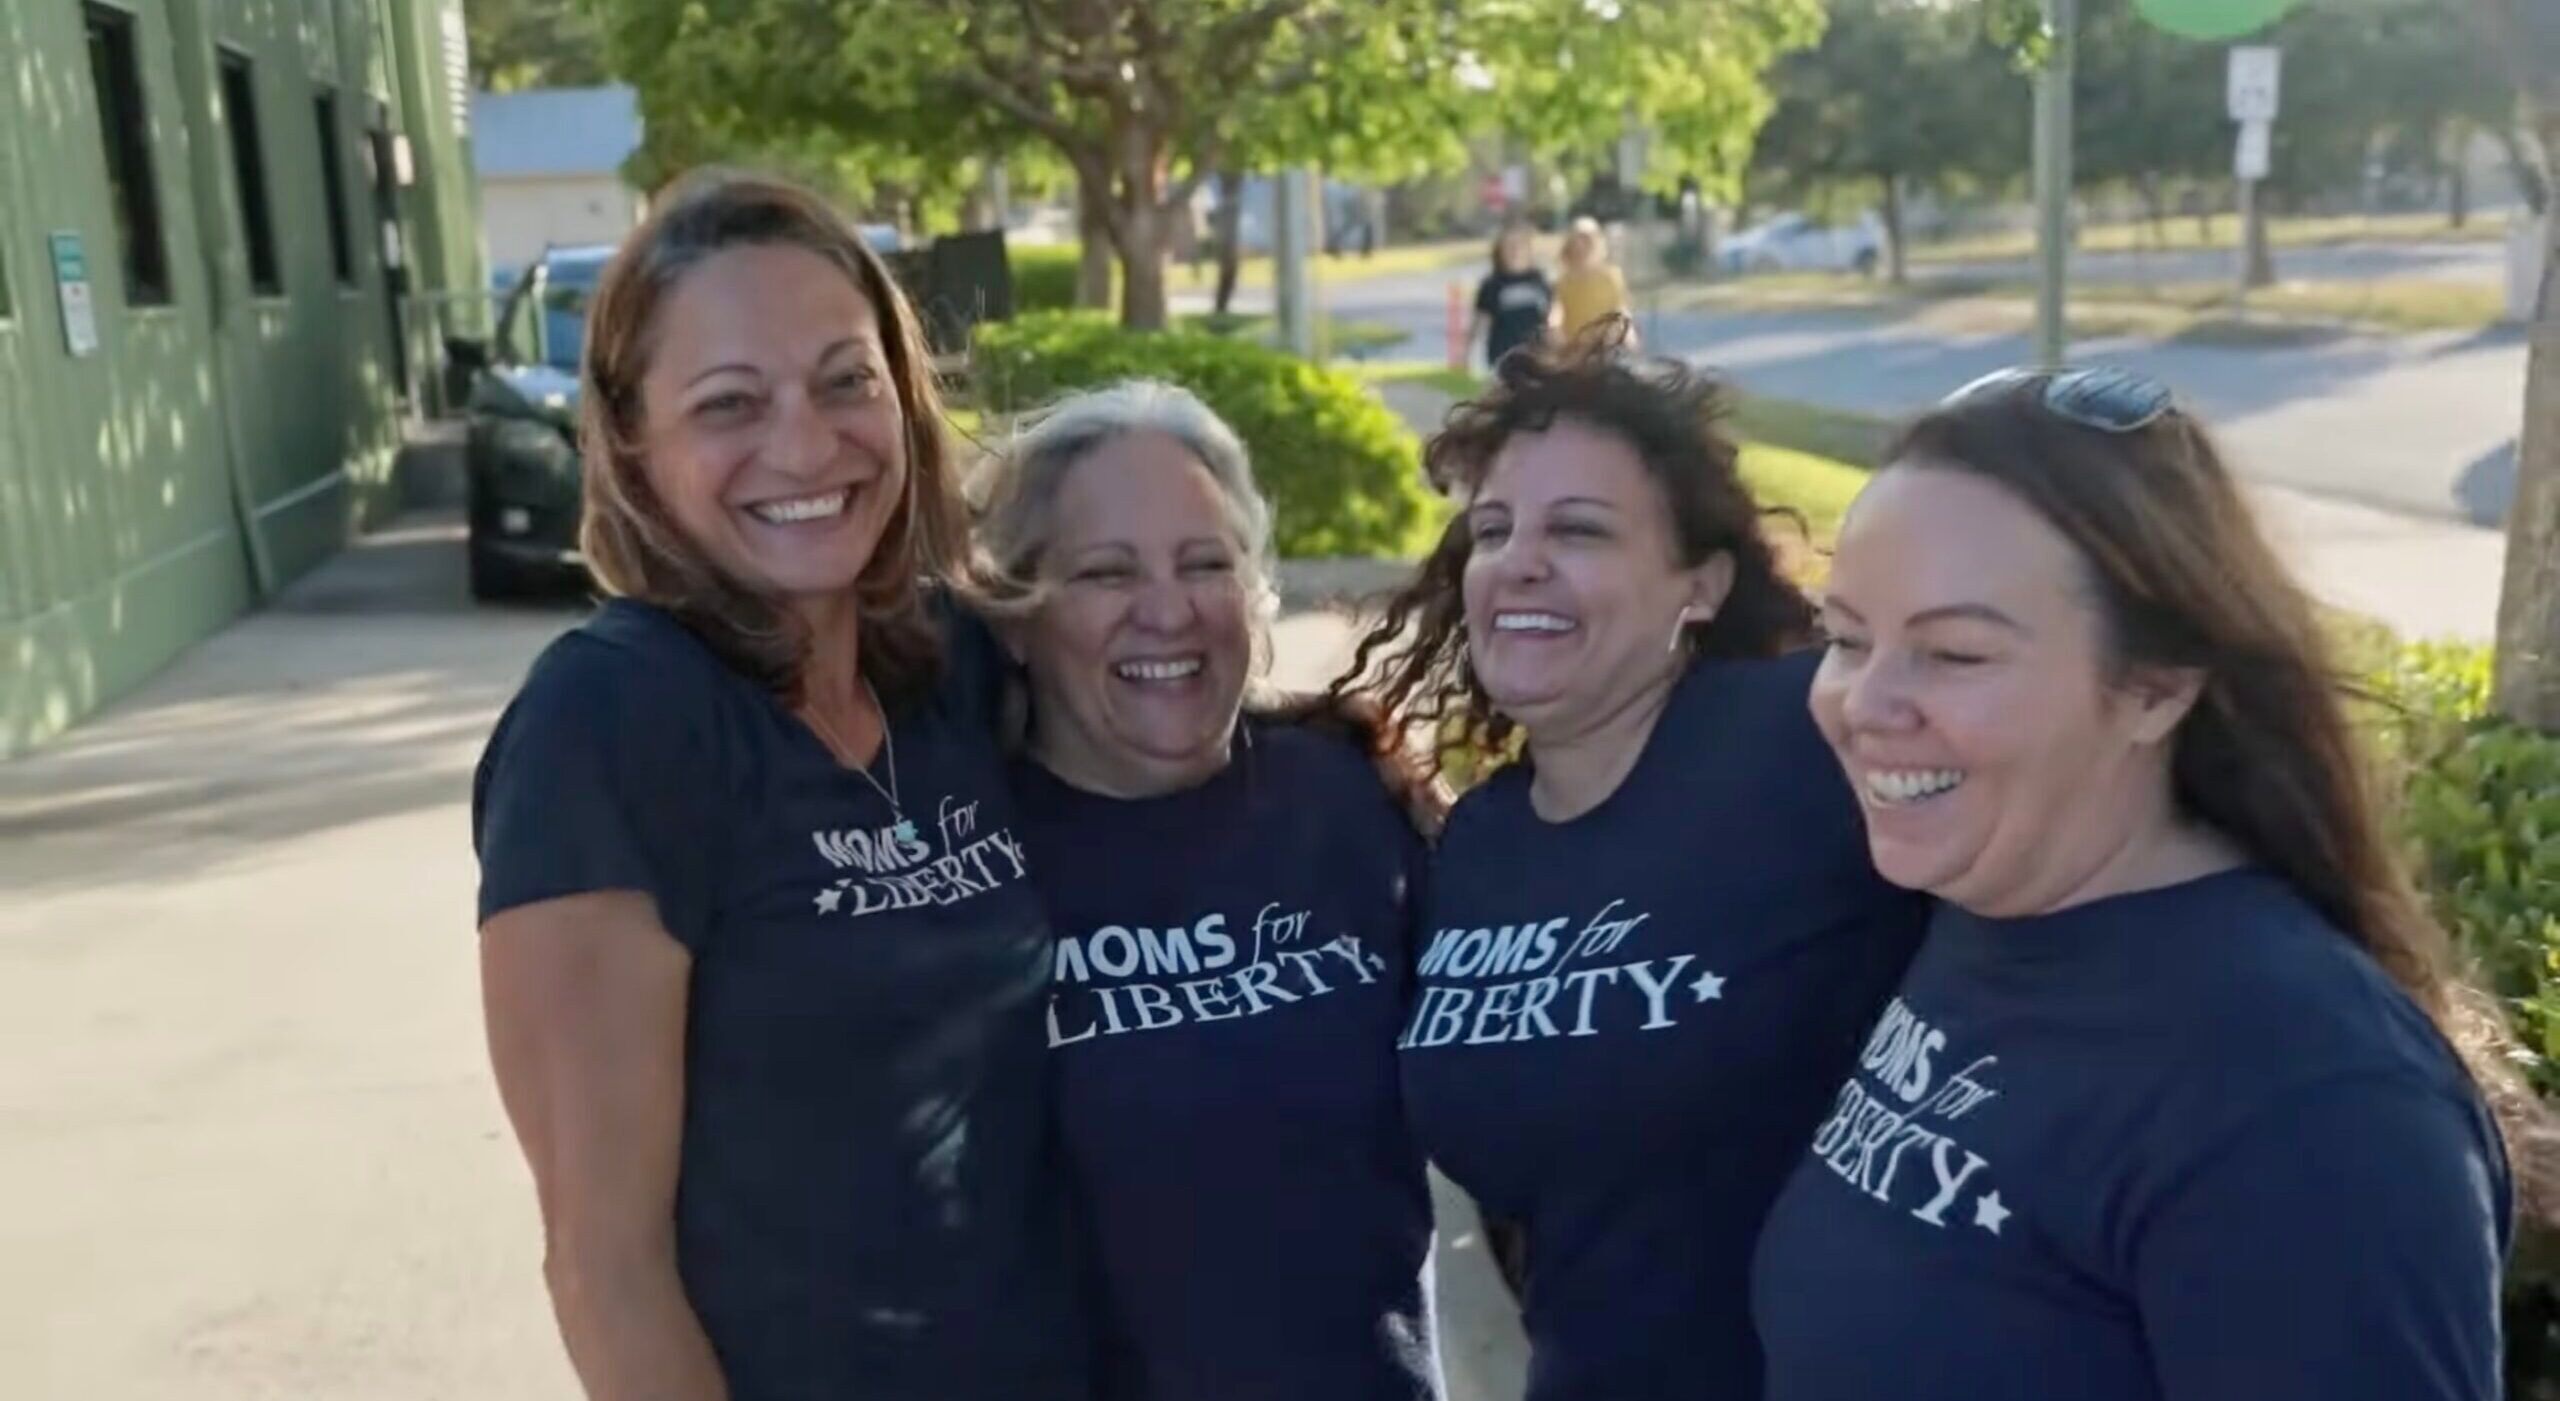 Moms for Liberty says